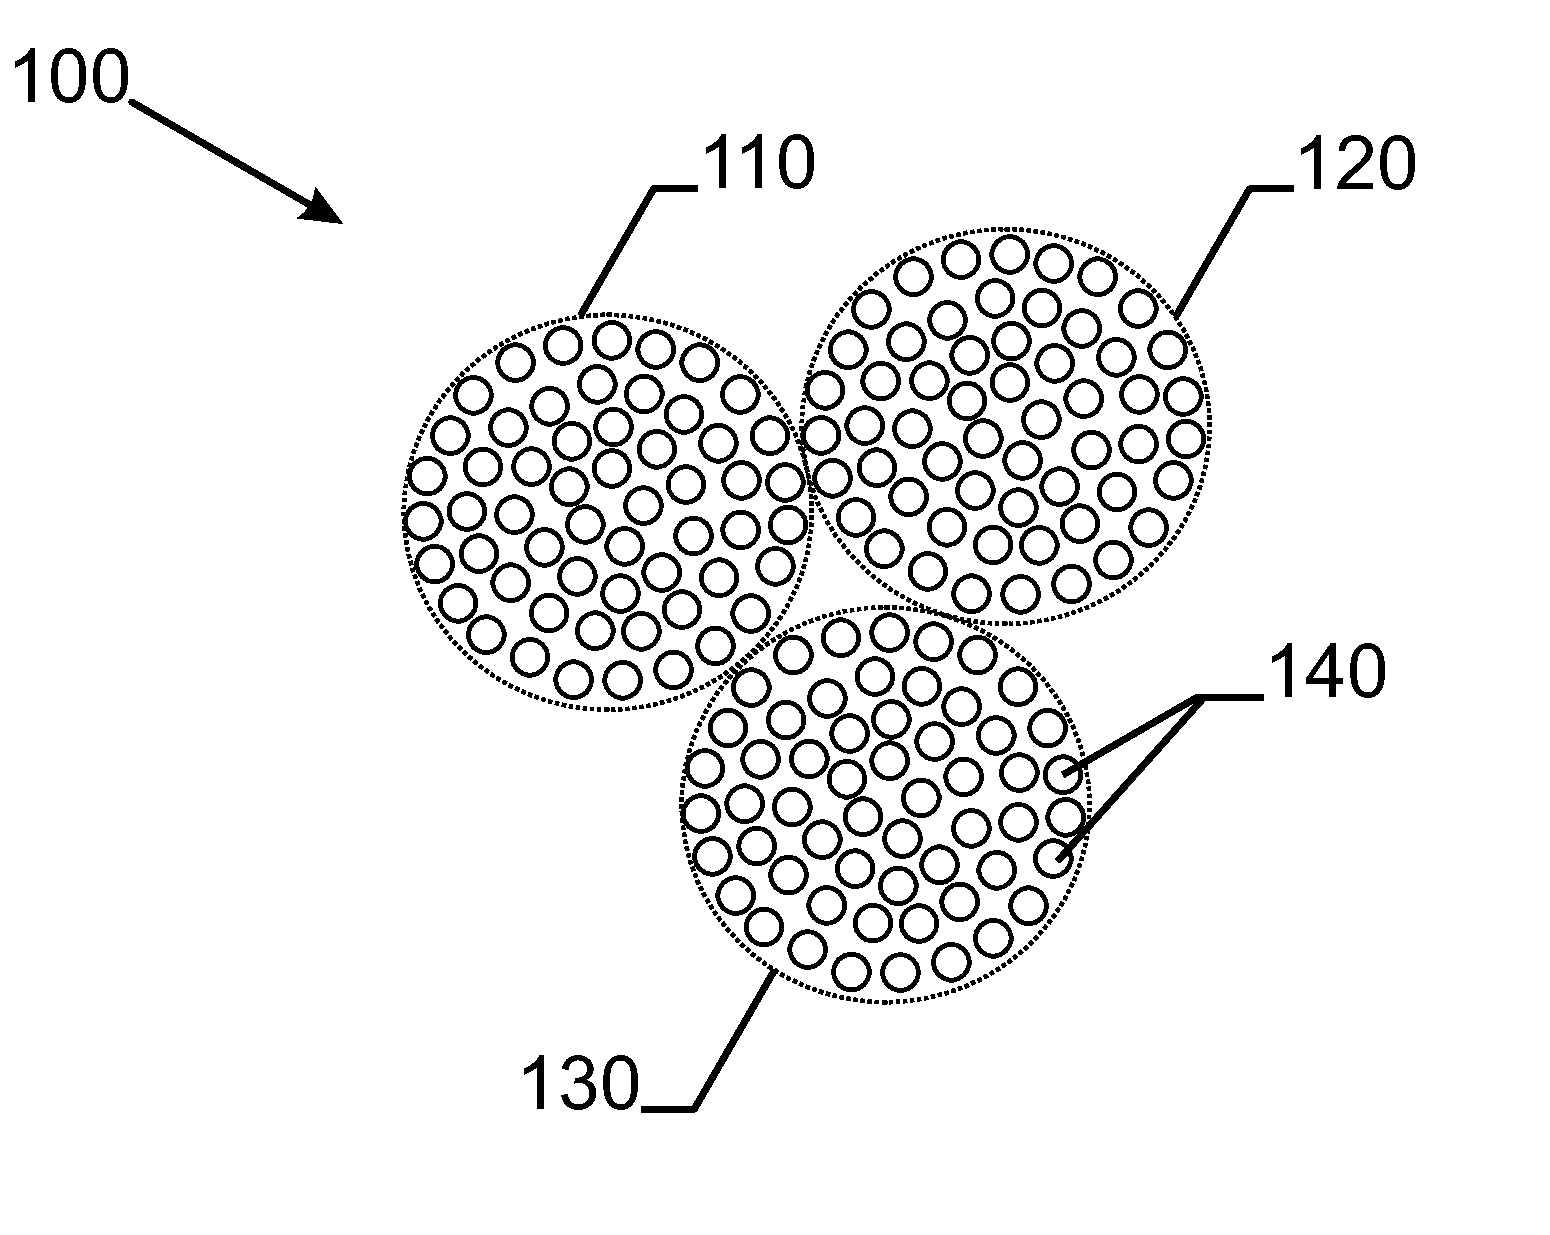 Electrically conductive yarn with reduced torsions